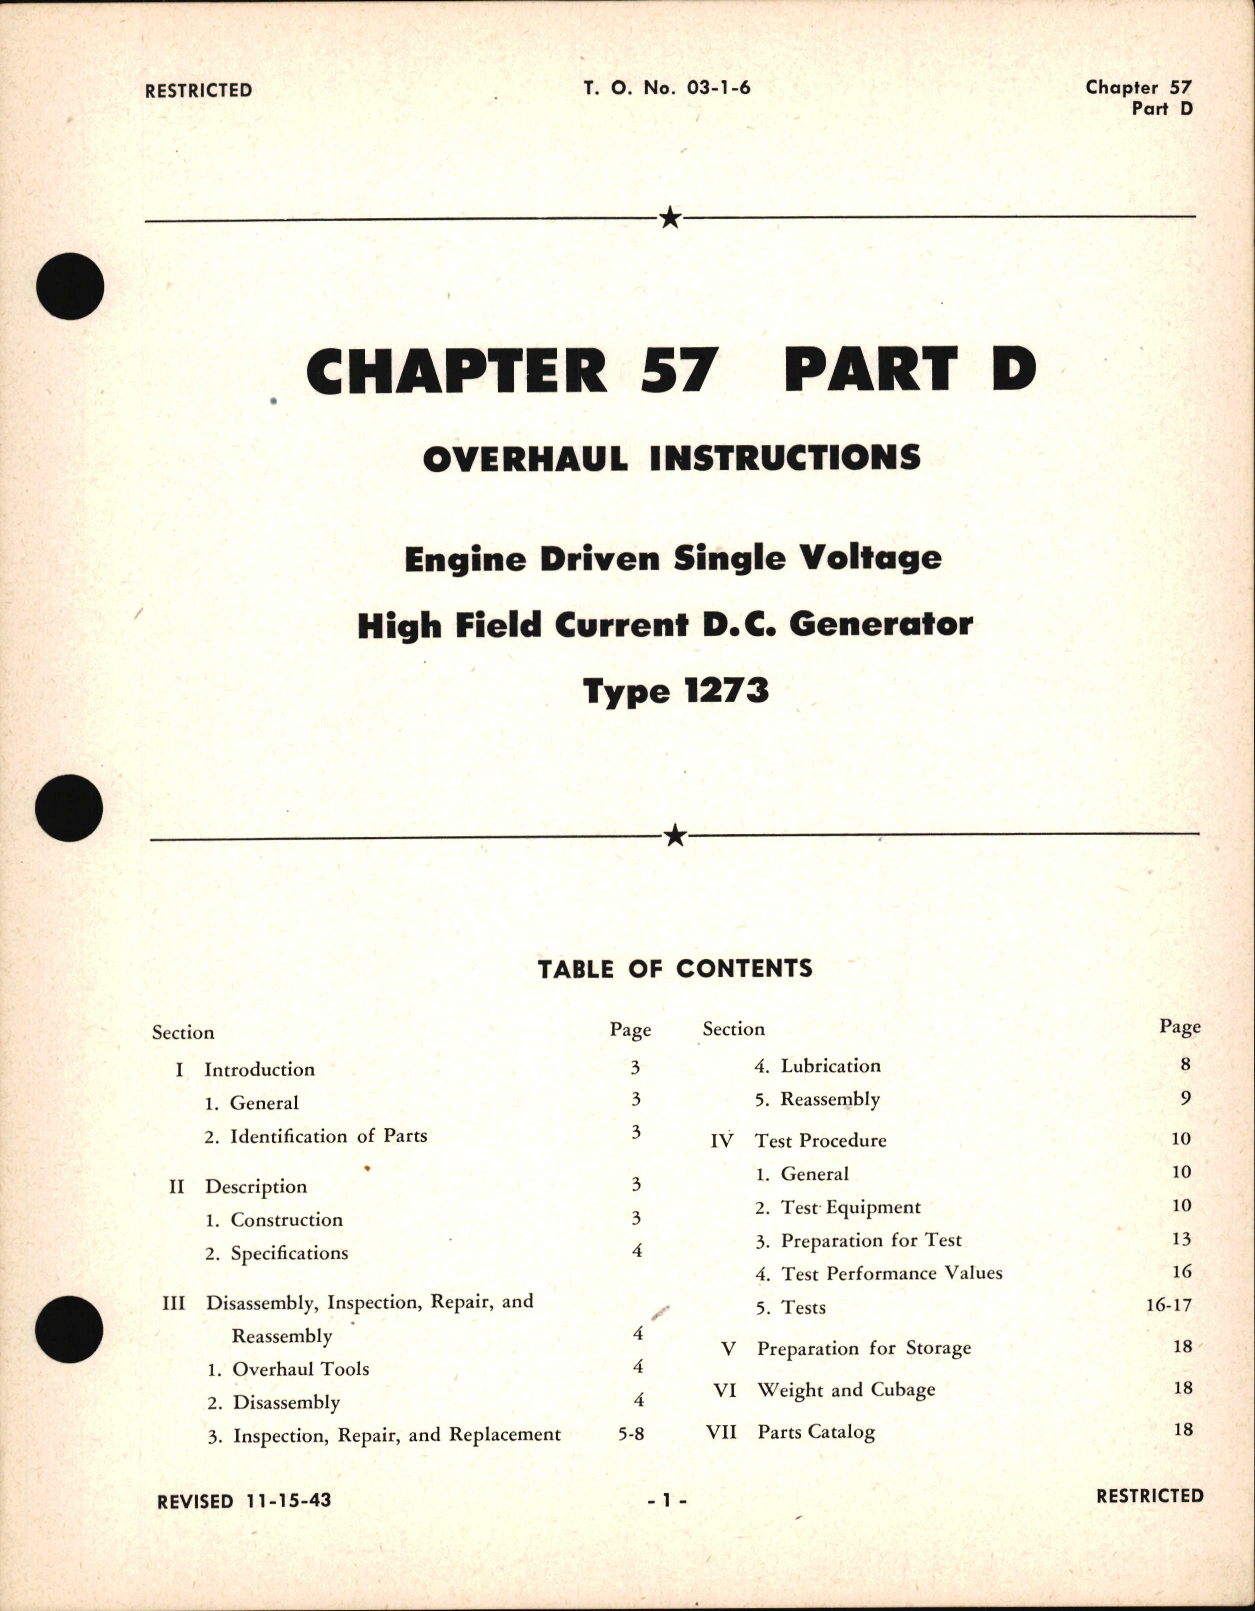 Sample page 1 from AirCorps Library document: Overhaul Instructions for Engine Driven Single Voltage High Field Current D.C. Generator, Ch 57 Part D